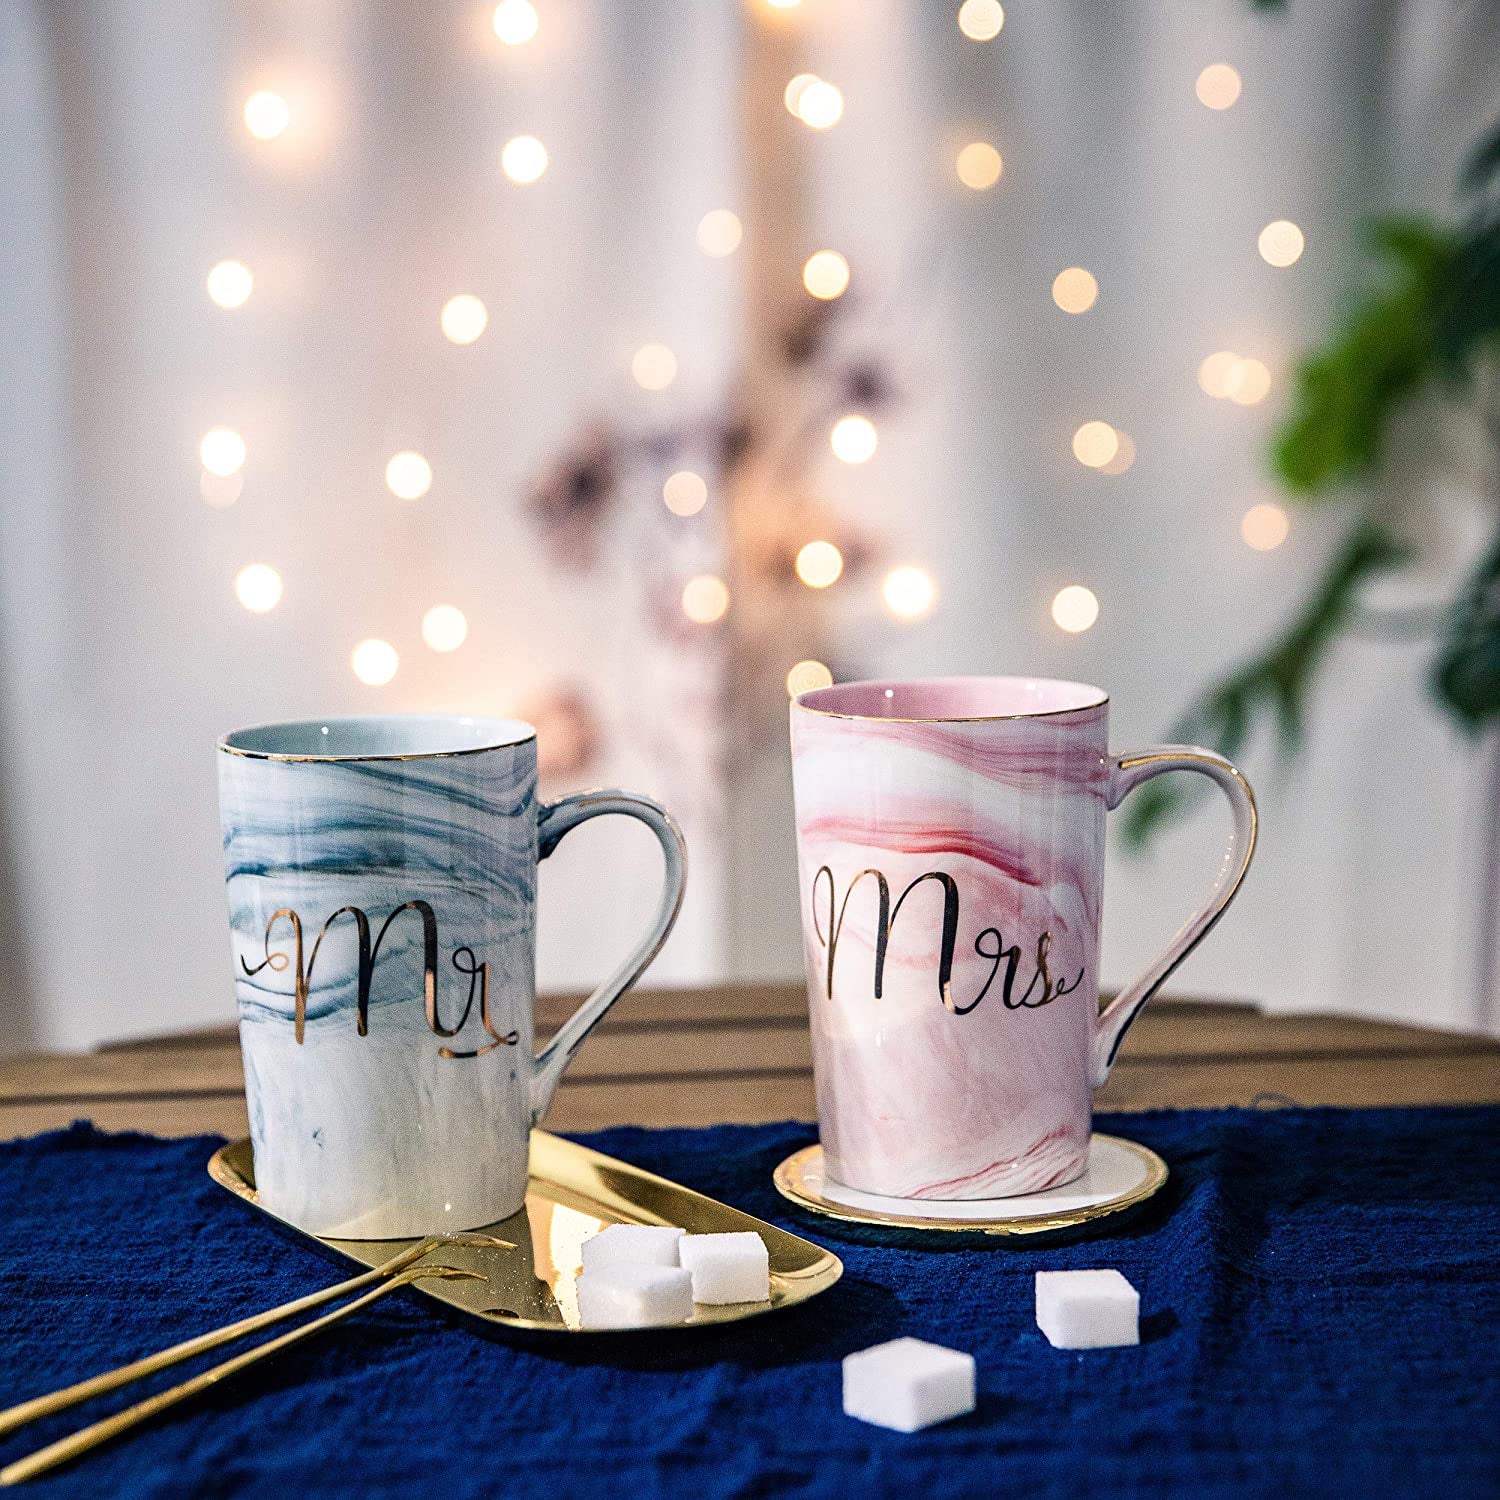 Mr and Mrs Coffee Mugs - Wedding Gifts for Bride and Groom - Gifts for Bridal Shower Engagement Wedding and Married Couples Anniversary - Ceramic Marble Cups 14 Oz Pink